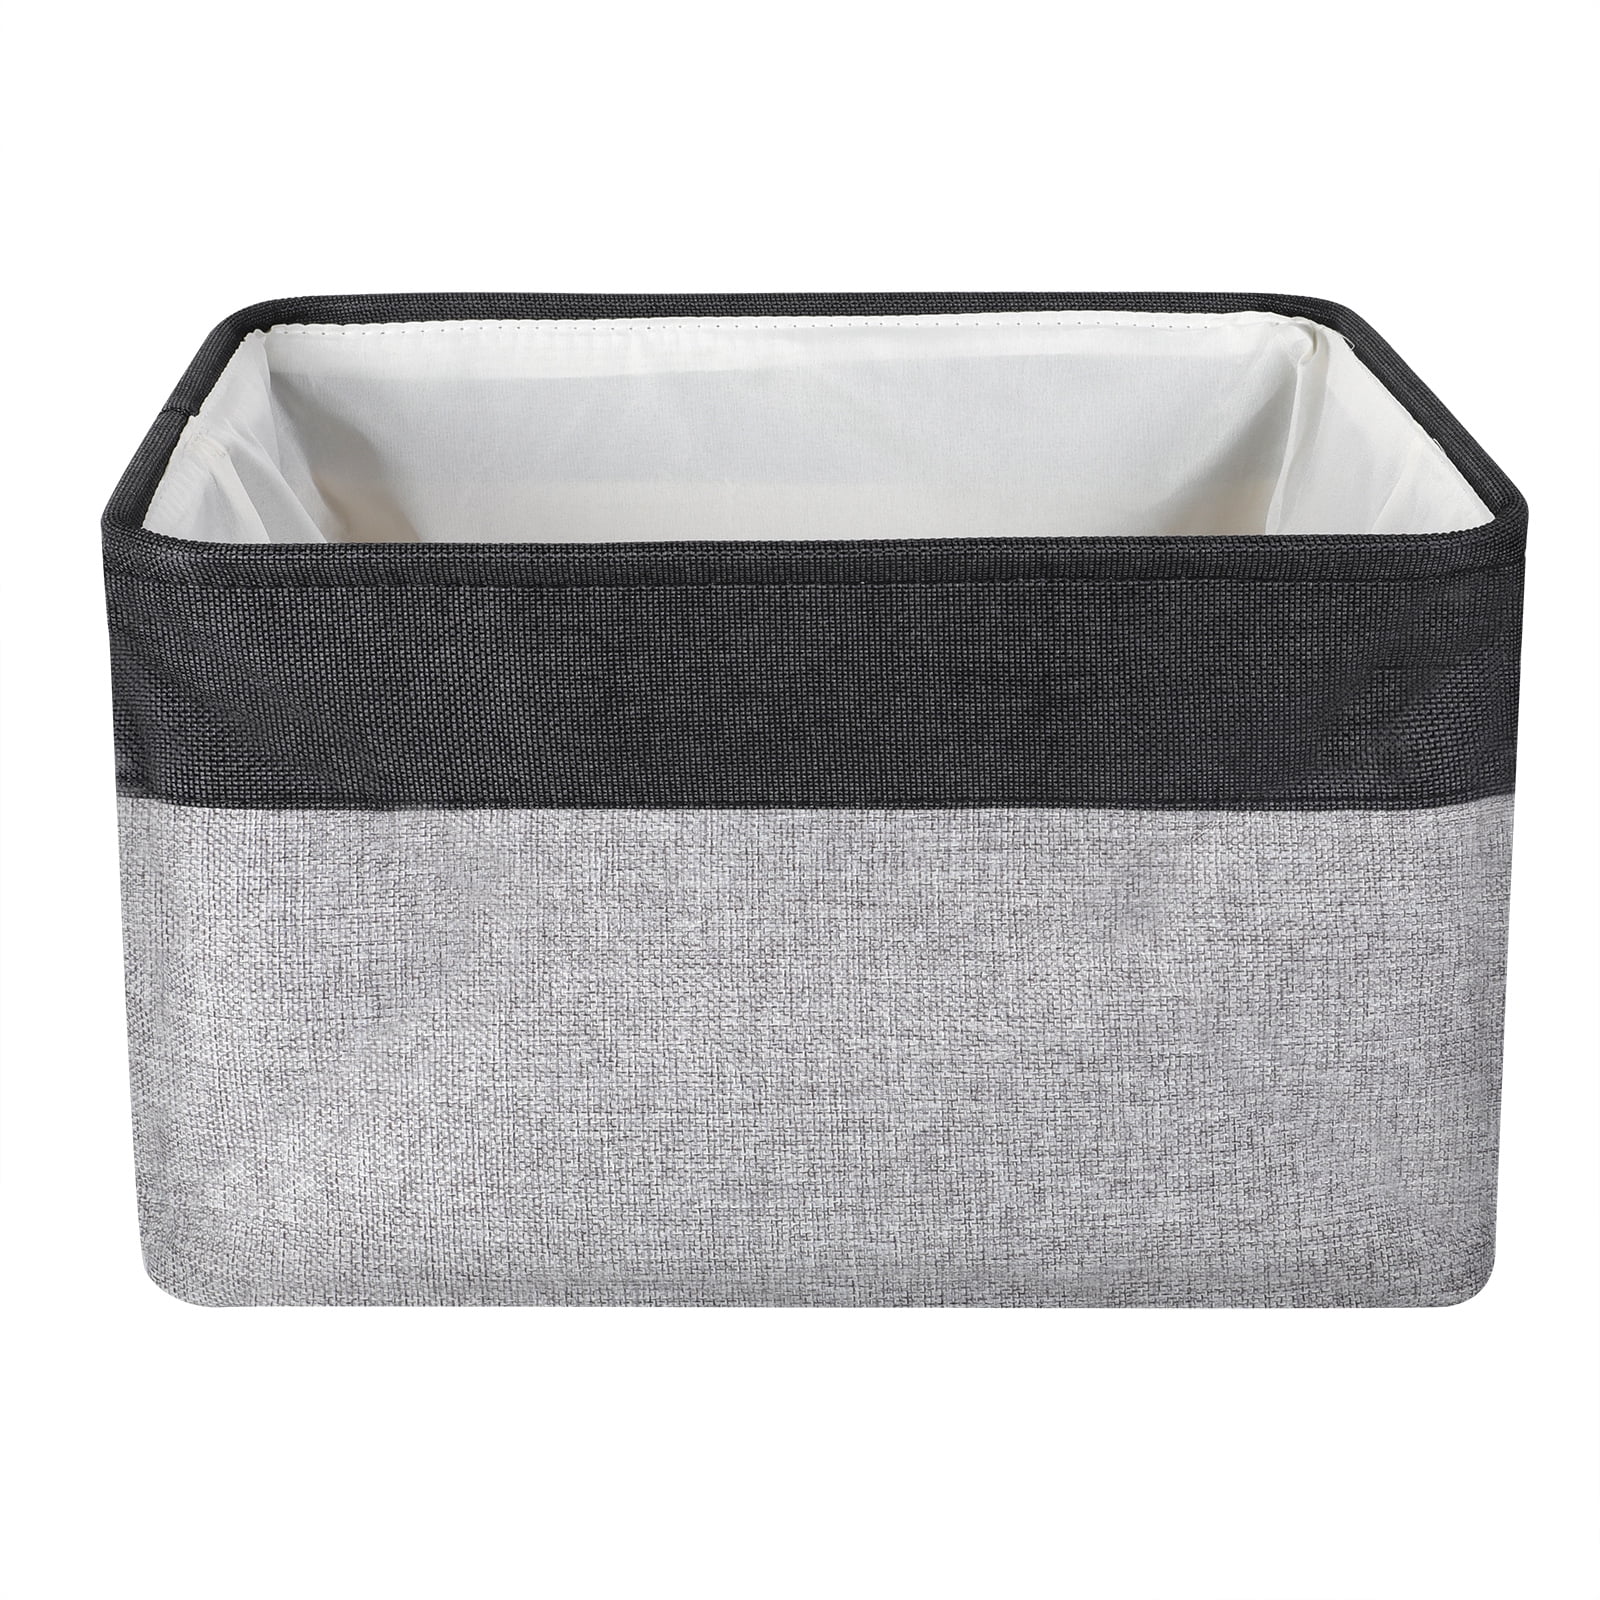 Large Fabric Storage Baskets for Shelves，Decorative Linen Closet Baskets  with Handles for Organizing，Closet Storage Bin with Lid for Clothe,Corduroy